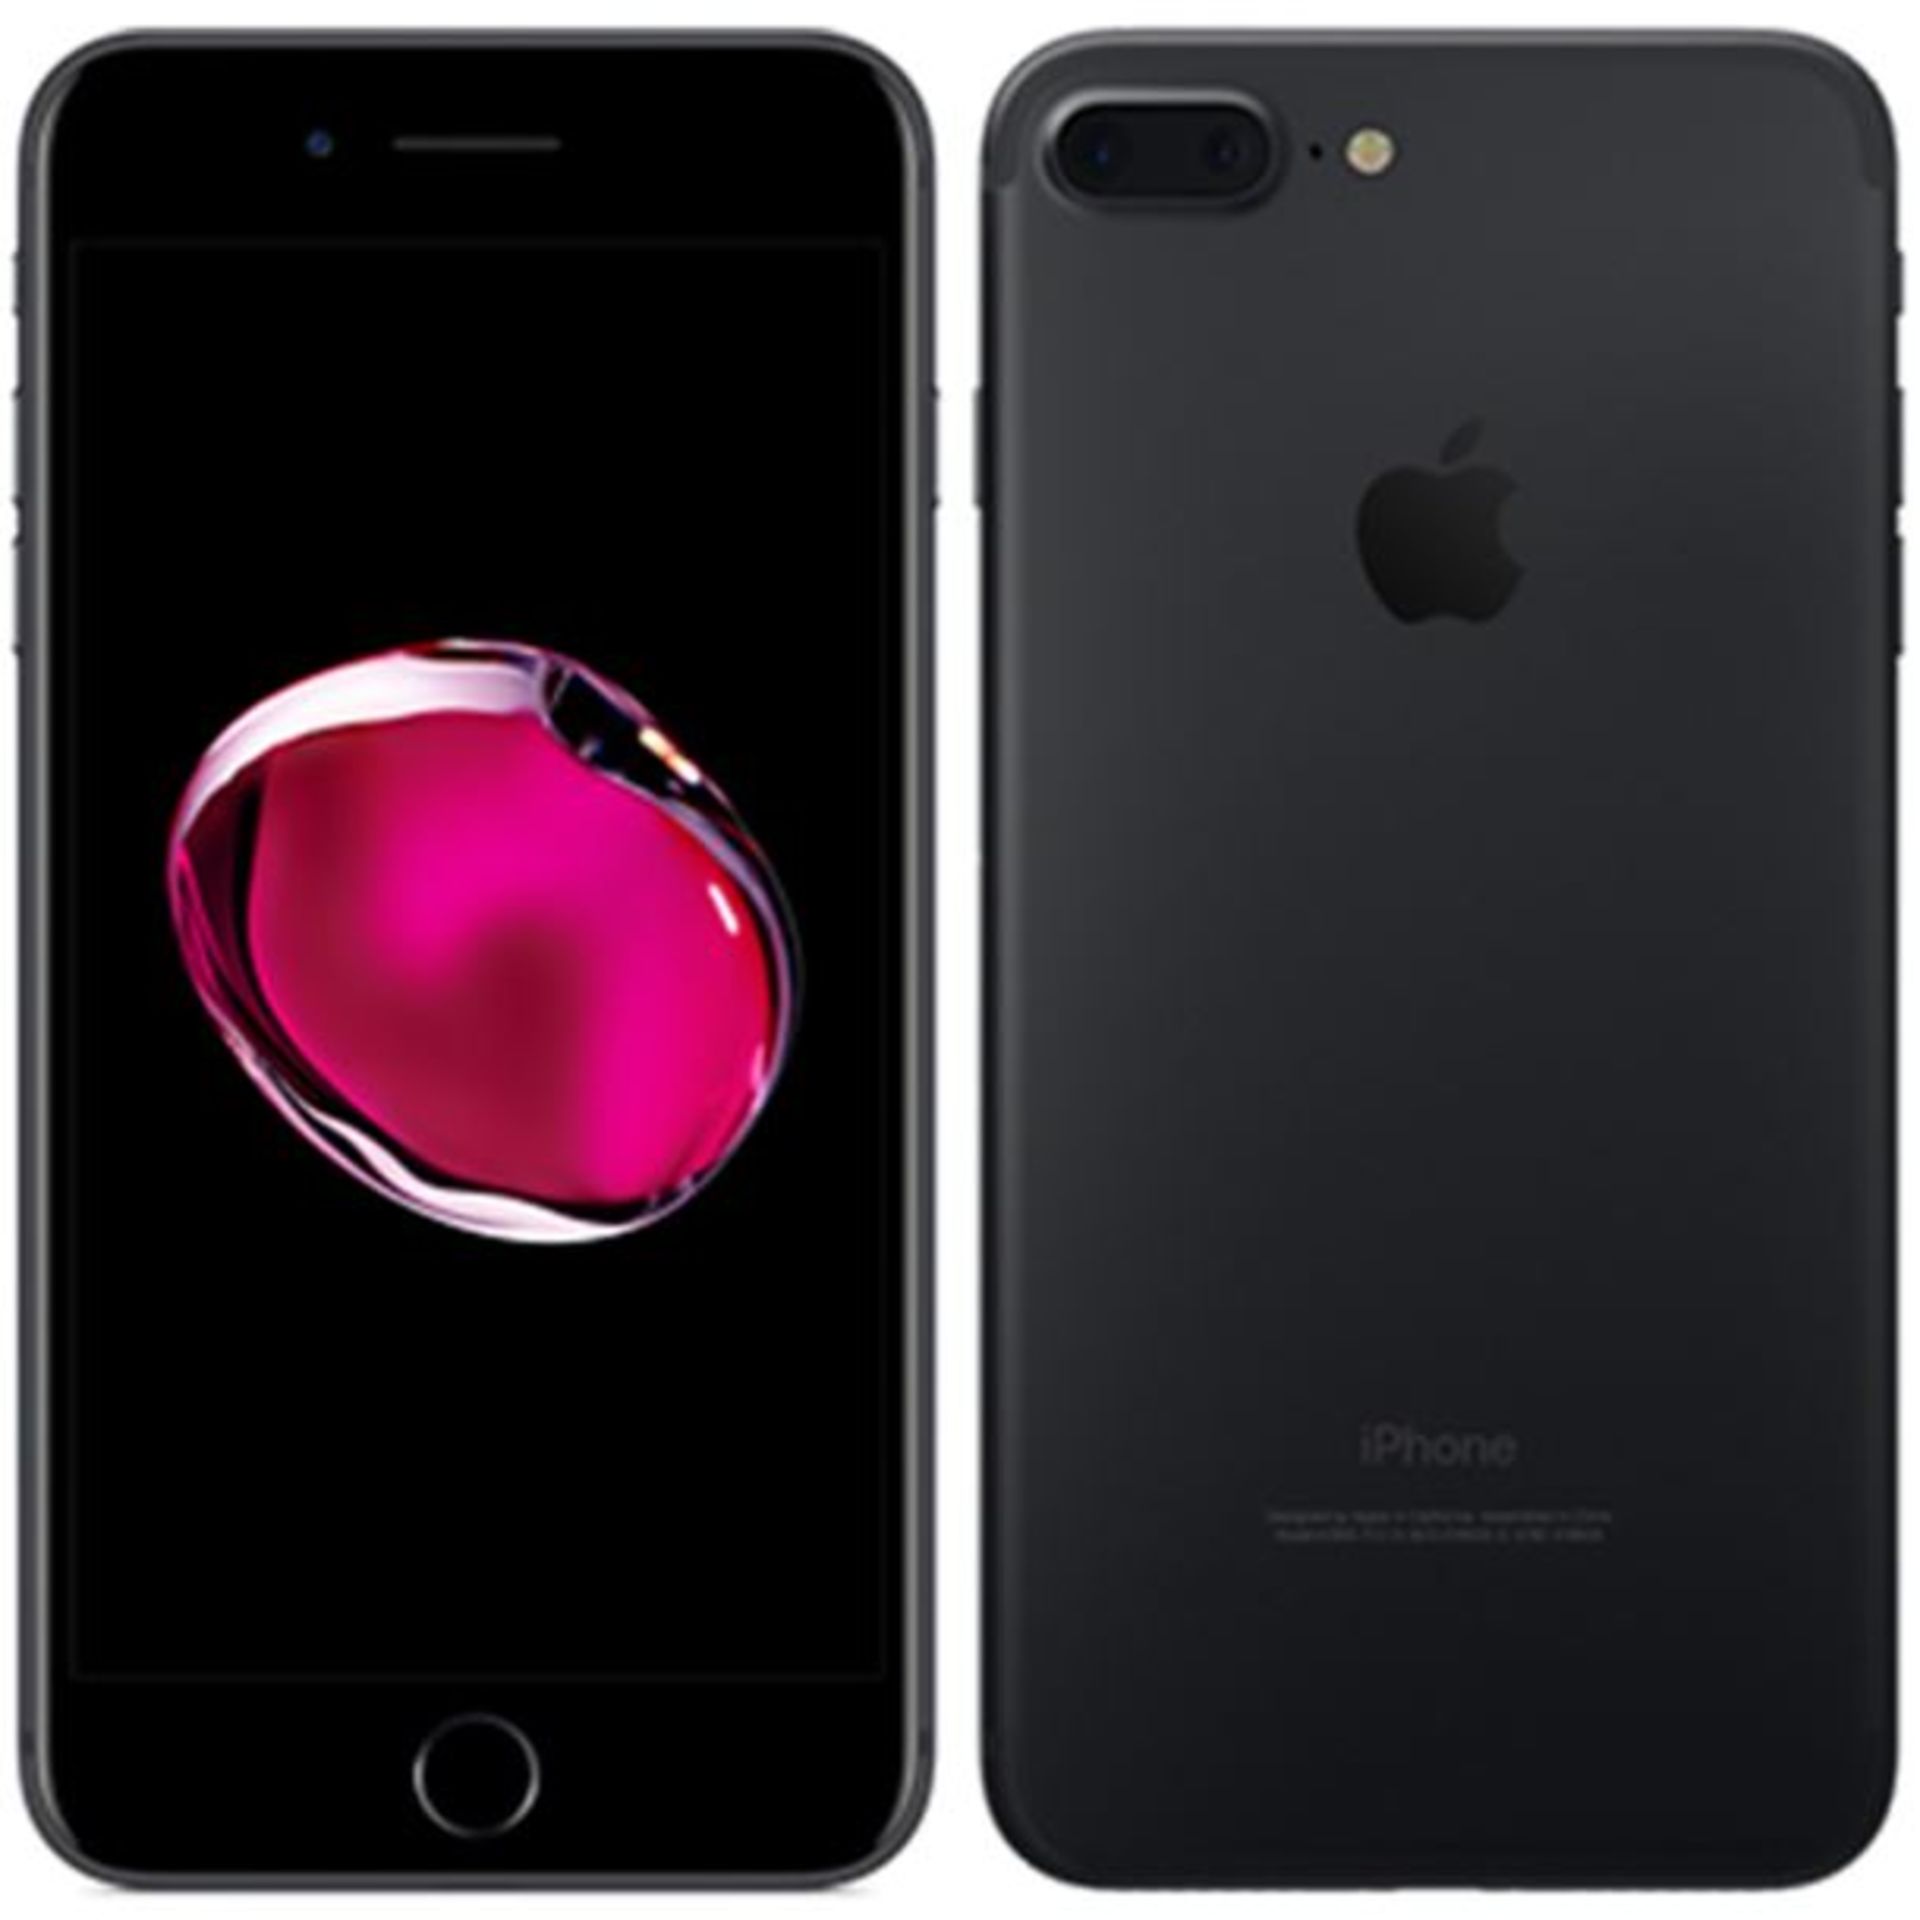 + VAT Grade A Apple iPhone 7 Plus Mobile Phone - 128Gb - Black/White/Gold/Red/Pink - Item Is